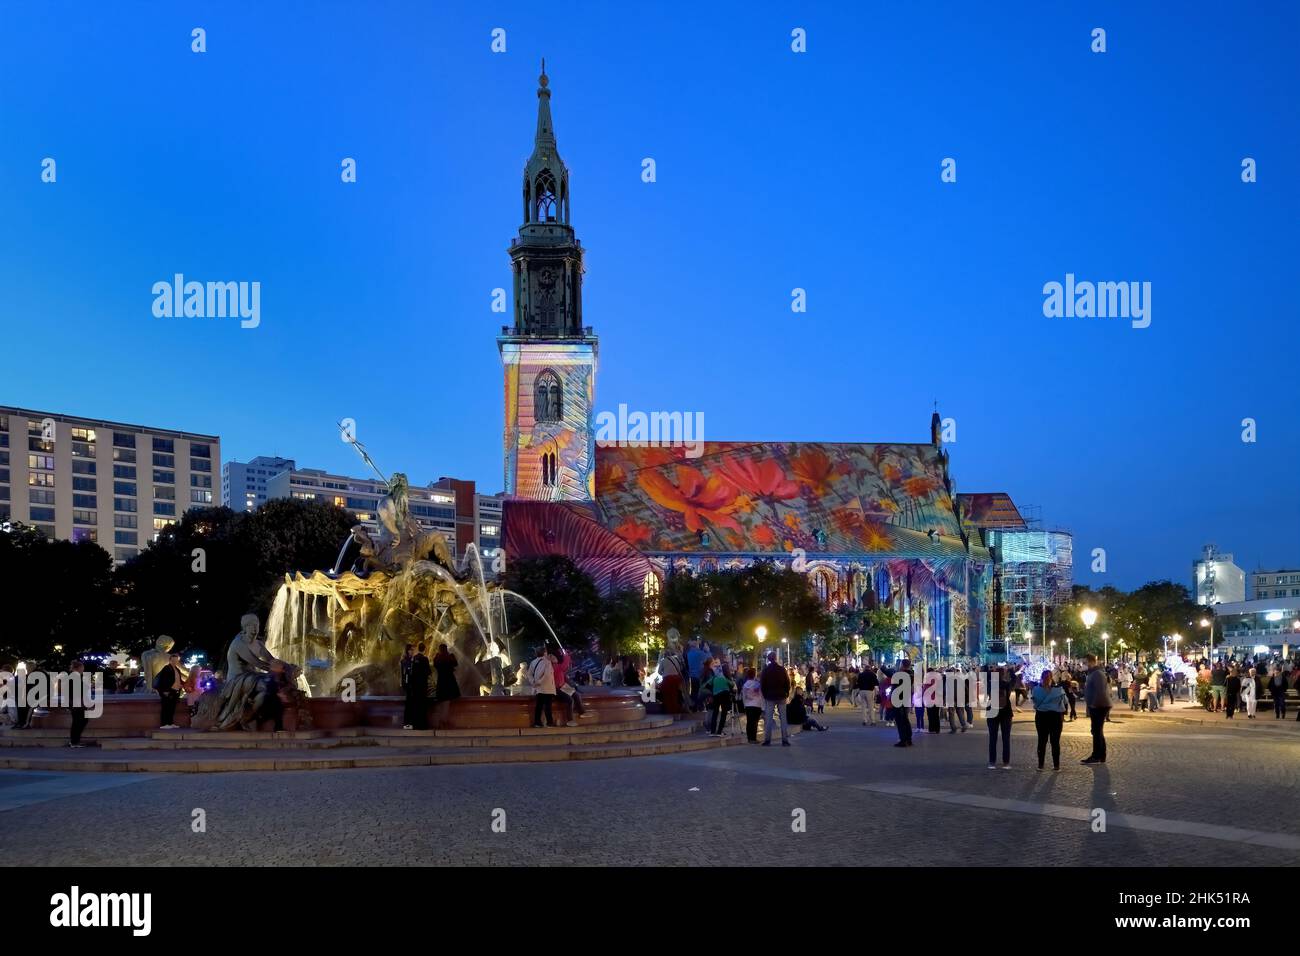 Saint Mary's Church, during the Festival of Lights, Berlin Mitte district, Berlin, Germany, Europe Stock Photo